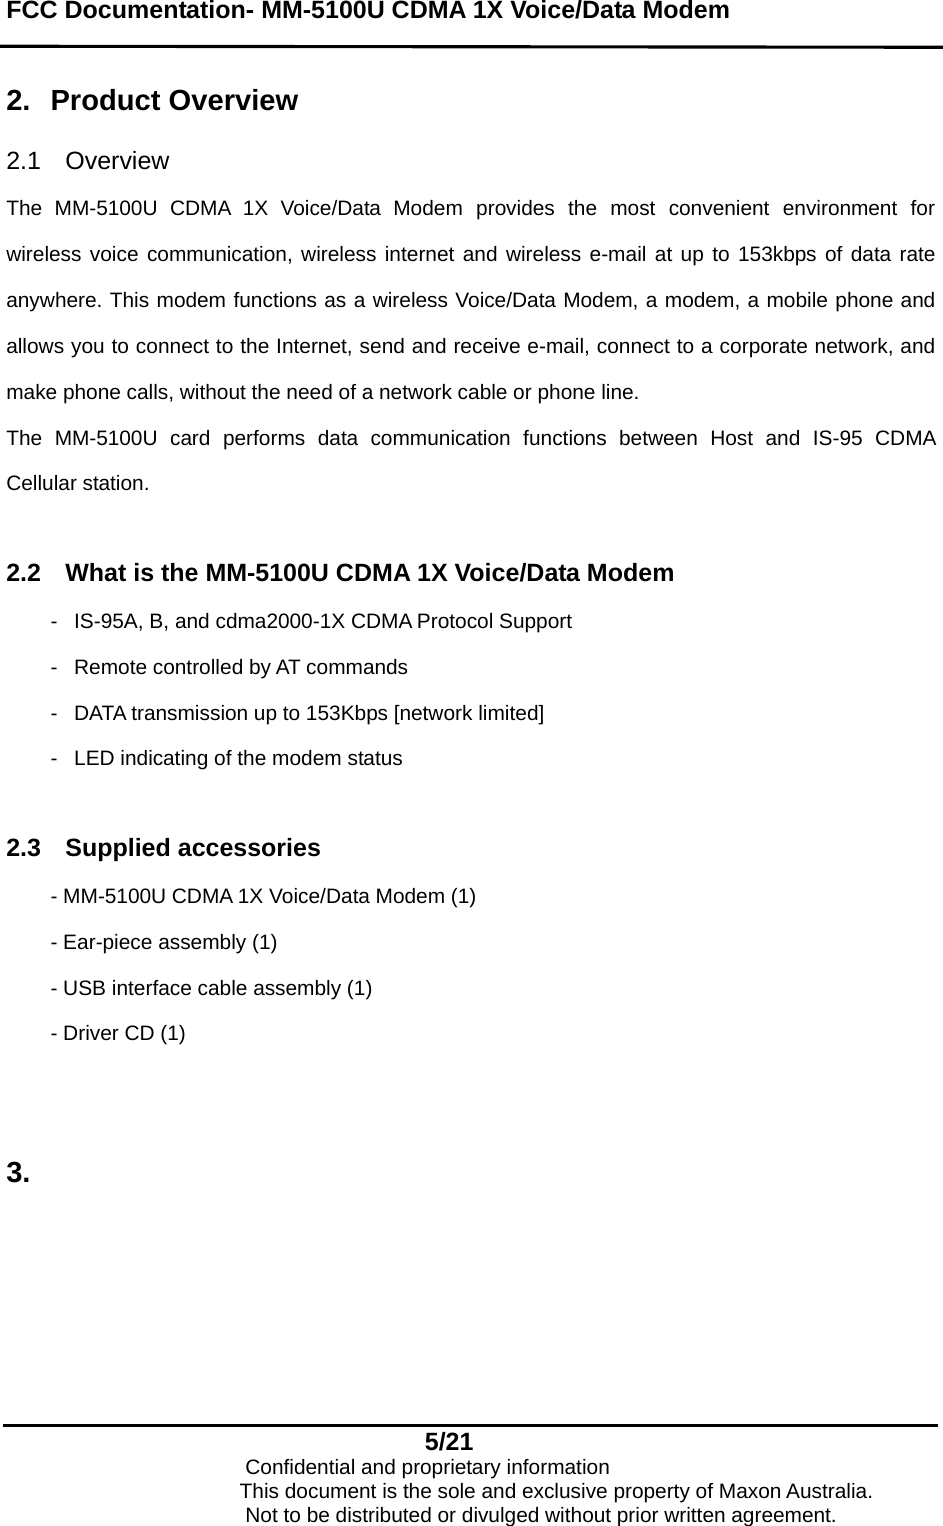 FCC Documentation- MM-5100U CDMA 1X Voice/Data Modem   2.  Product Overview  2.1 Overview  The MM-5100U CDMA 1X Voice/Data Modem provides the most convenient environment for wireless voice communication, wireless internet and wireless e-mail at up to 153kbps of data rate anywhere. This modem functions as a wireless Voice/Data Modem, a modem, a mobile phone and allows you to connect to the Internet, send and receive e-mail, connect to a corporate network, and make phone calls, without the need of a network cable or phone line. The MM-5100U card performs data communication functions between Host and IS-95 CDMA Cellular station.   2.2  What is the MM-5100U CDMA 1X Voice/Data Modem -  IS-95A, B, and cdma2000-1X CDMA Protocol Support -  Remote controlled by AT commands -  DATA transmission up to 153Kbps [network limited] -  LED indicating of the modem status  2.3 Supplied accessories - MM-5100U CDMA 1X Voice/Data Modem (1) - Ear-piece assembly (1) - USB interface cable assembly (1) - Driver CD (1)   3.  5/21                            Confidential and proprietary information                       This document is the sole and exclusive property of Maxon Australia.                           Not to be distributed or divulged without prior written agreement. 